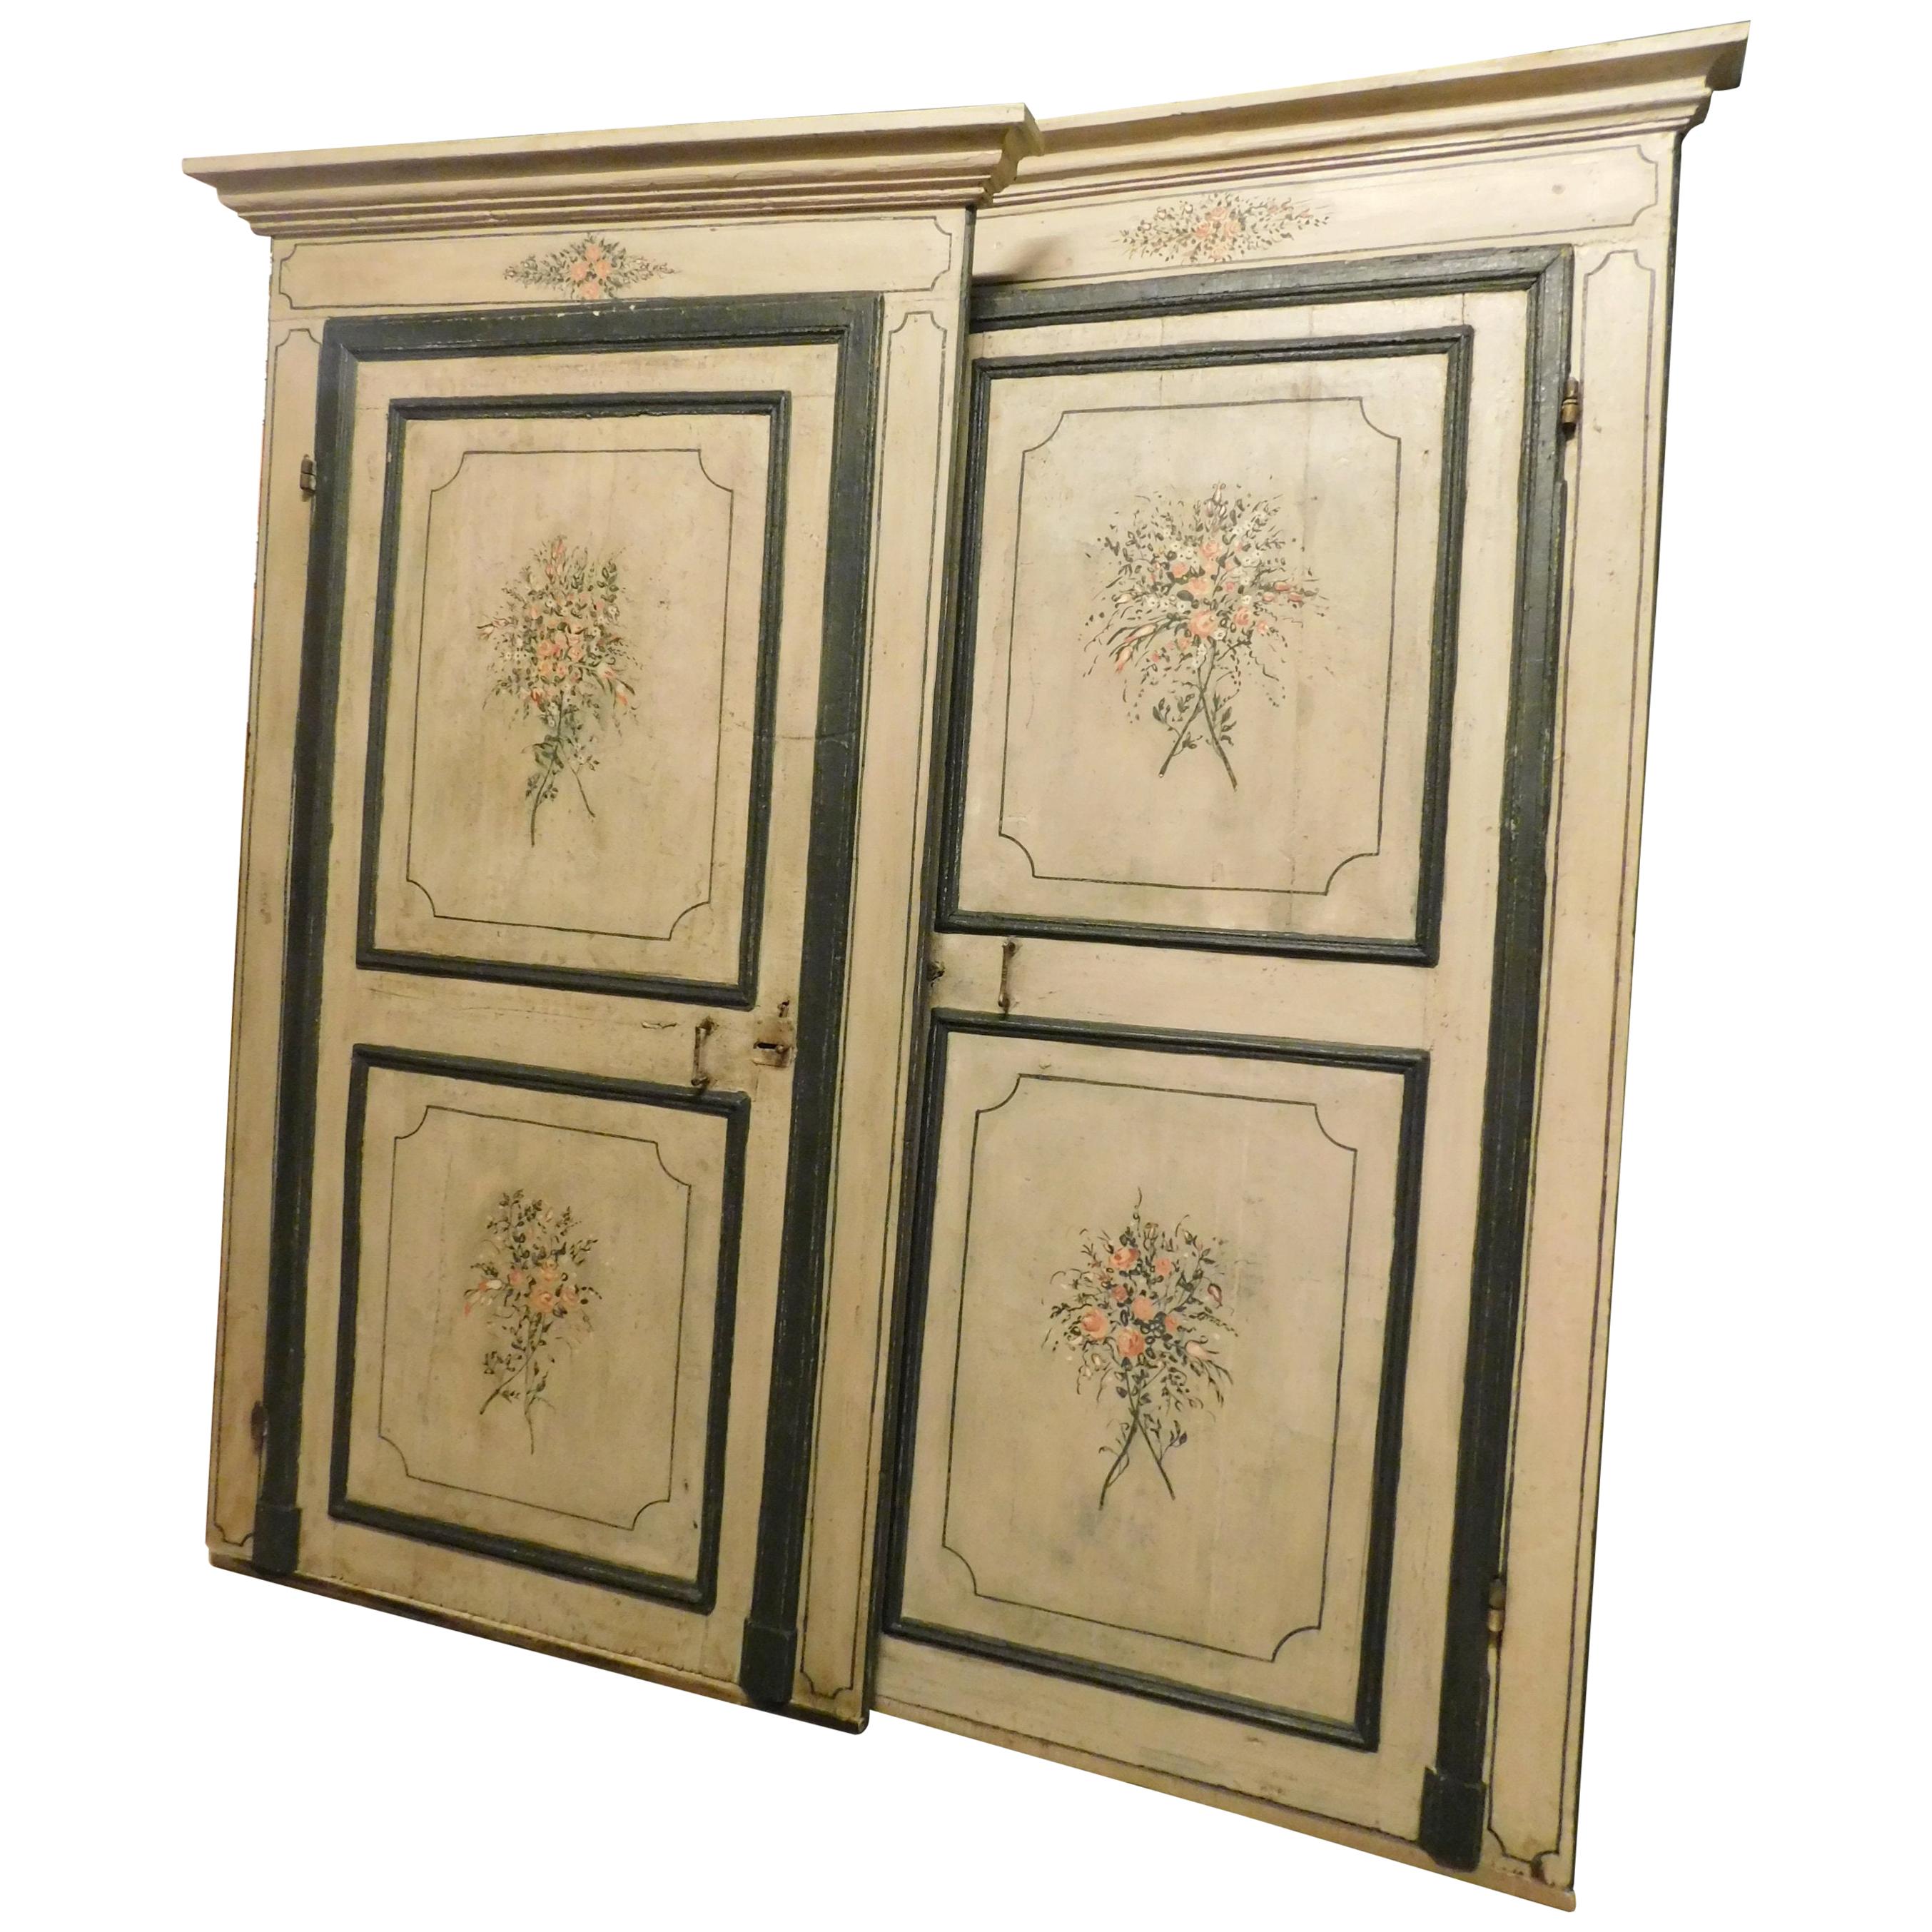 2 Antique Lacquered Doors with Frame, Green Beige Background Flowers, 1700 Italy